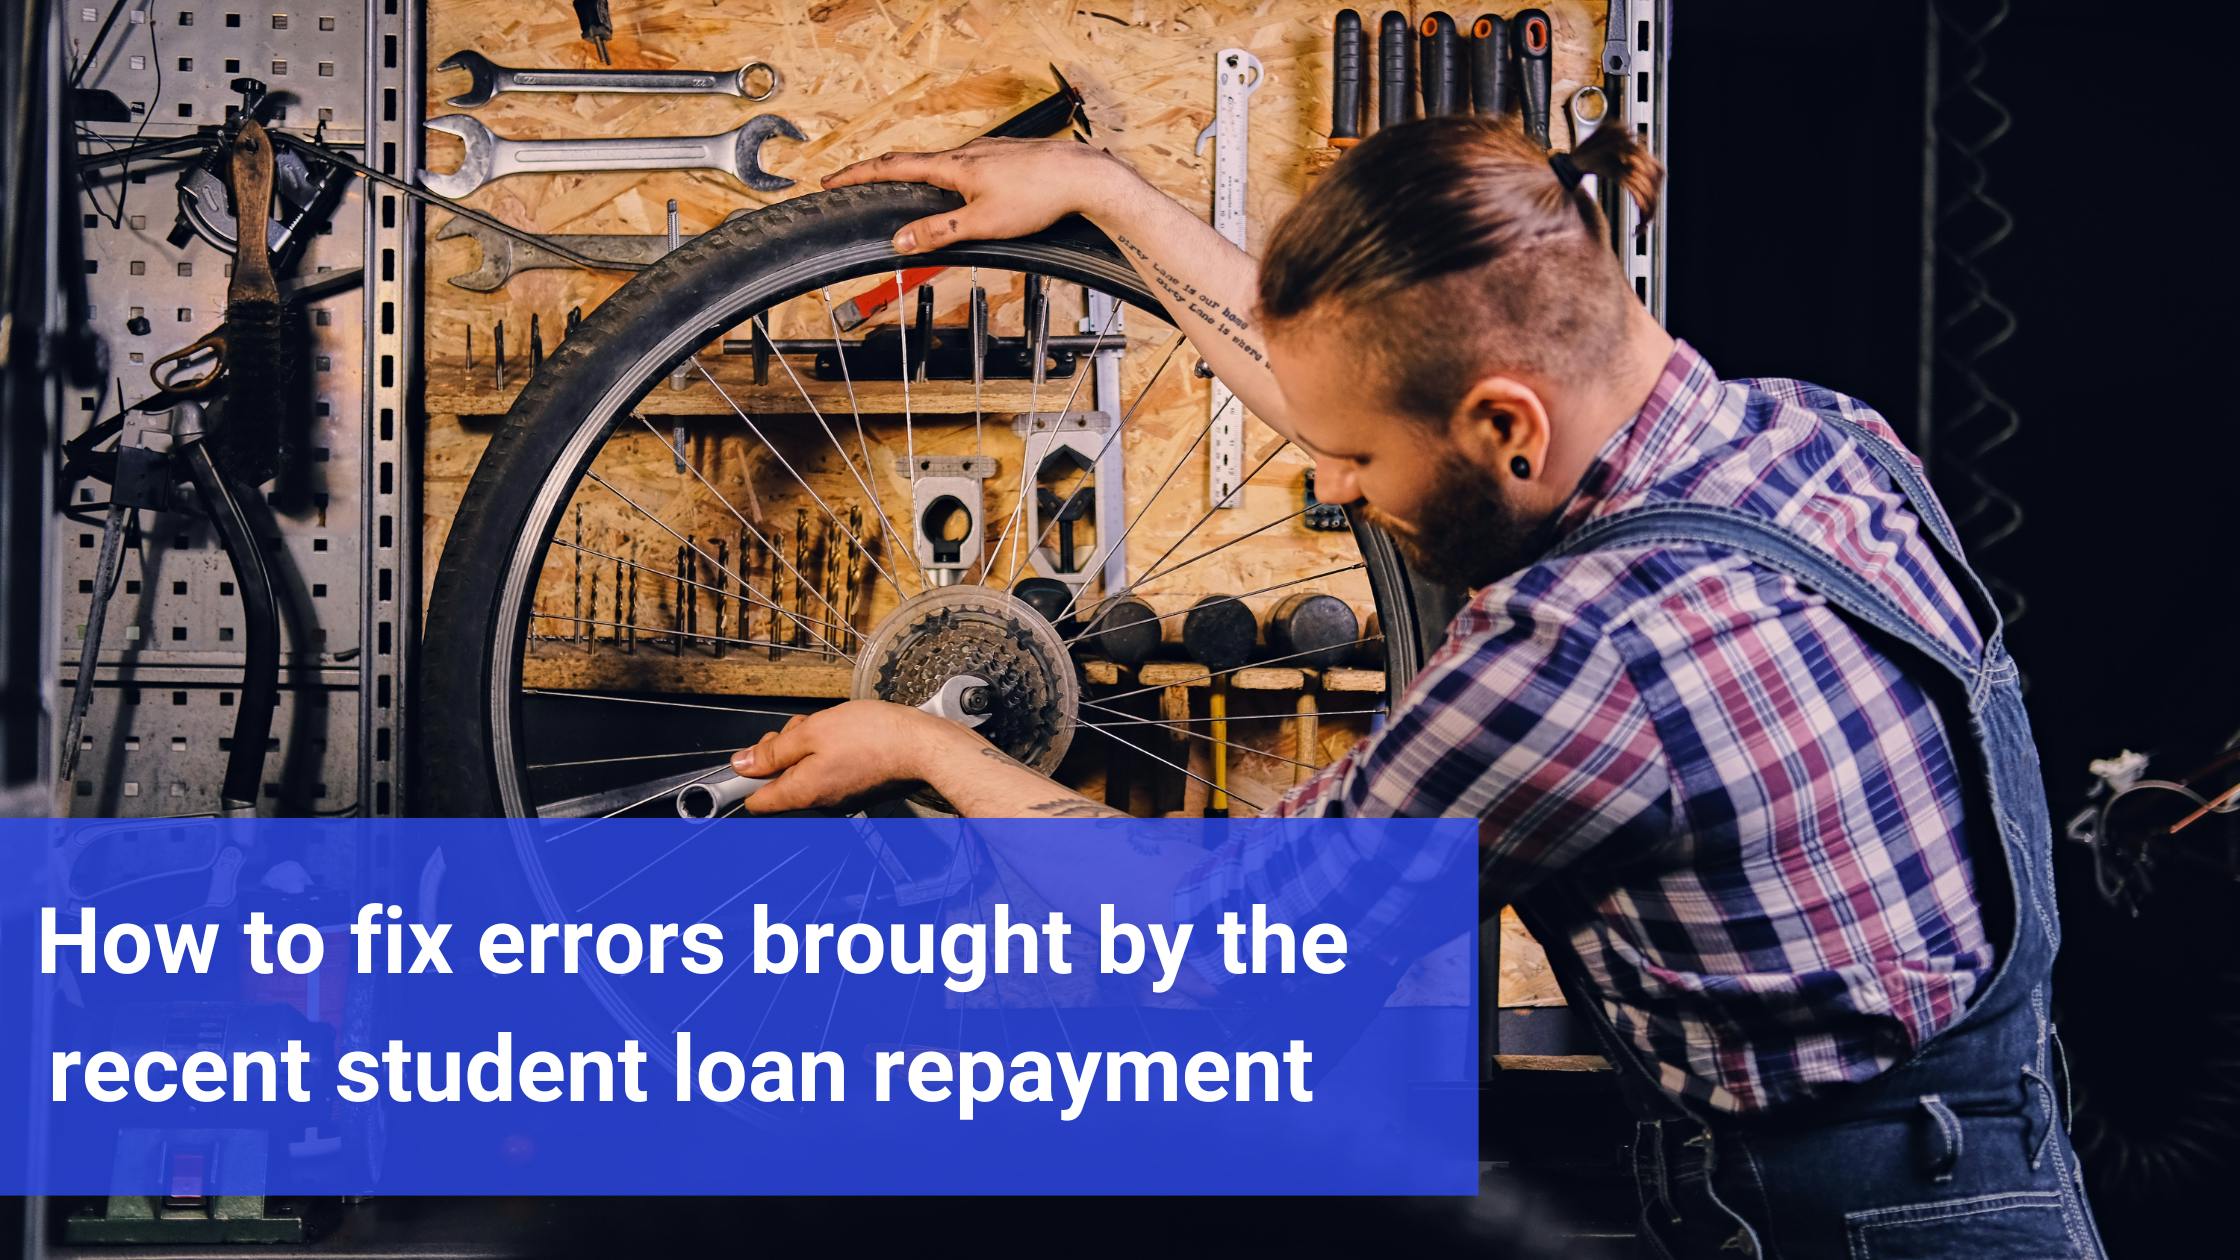 Guide to fixing errors when entering student loan repayment